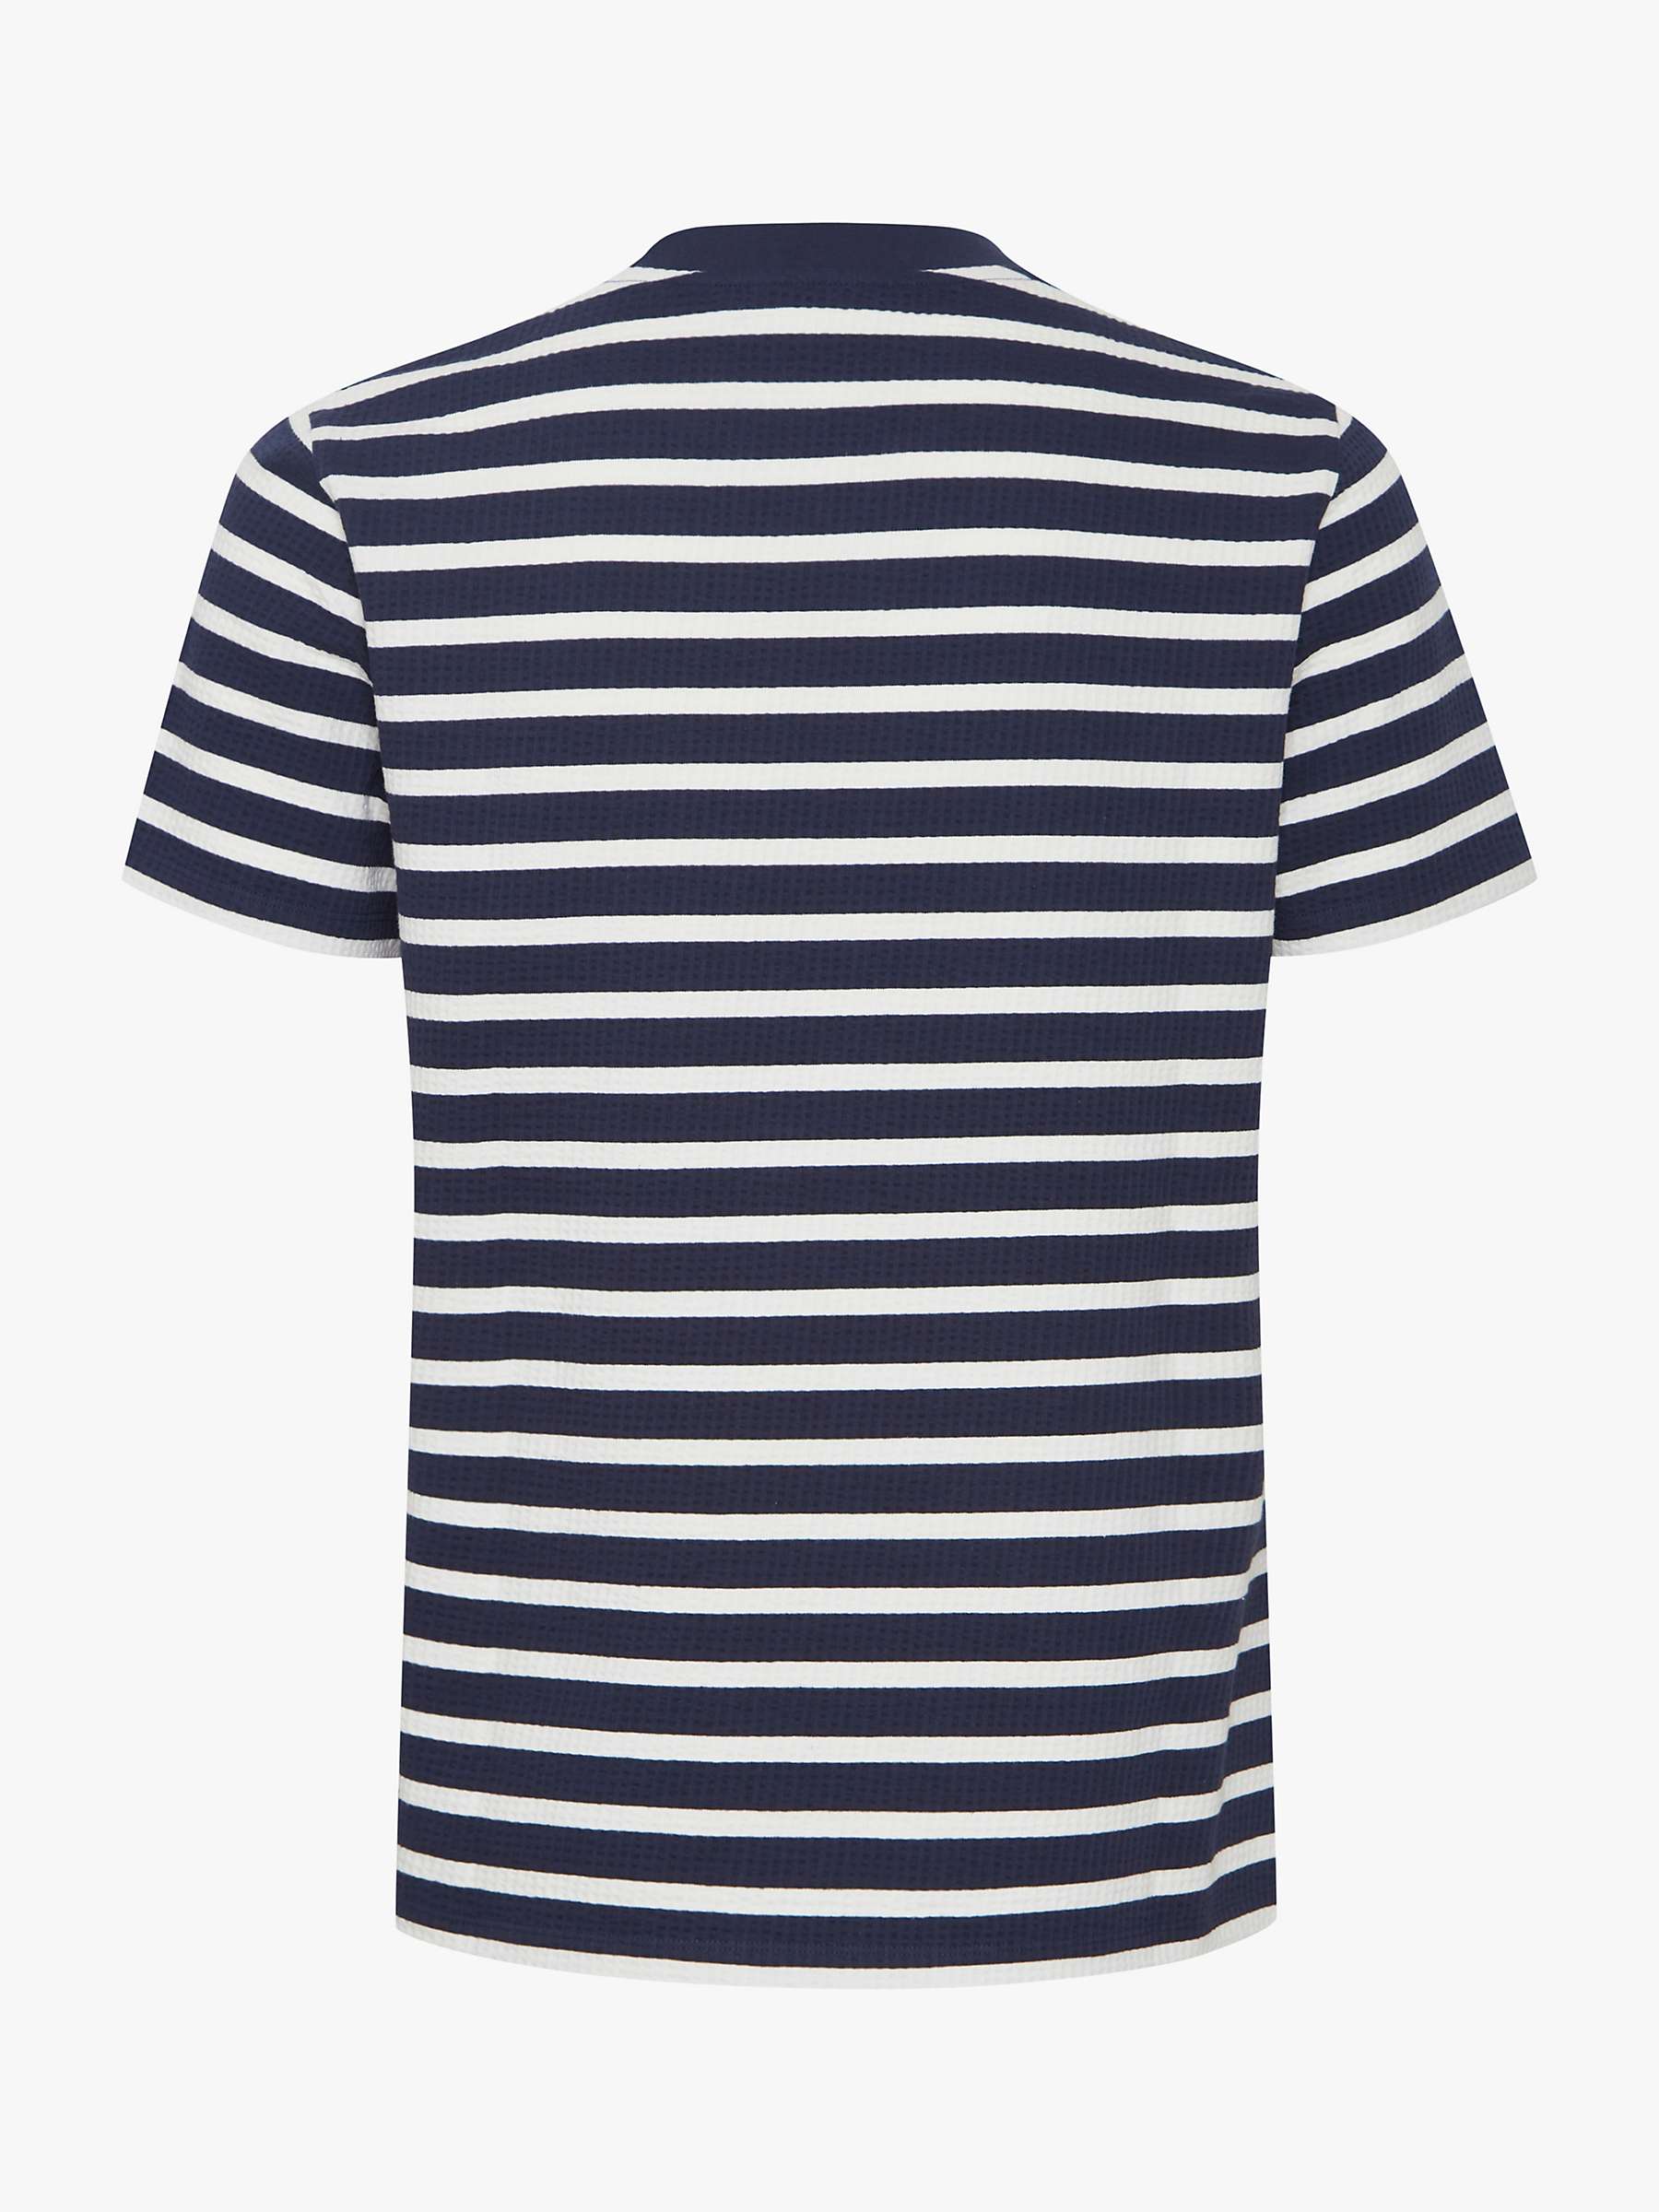 Buy Casual Friday Thor Striped Short Sleeve T-Shirt Online at johnlewis.com